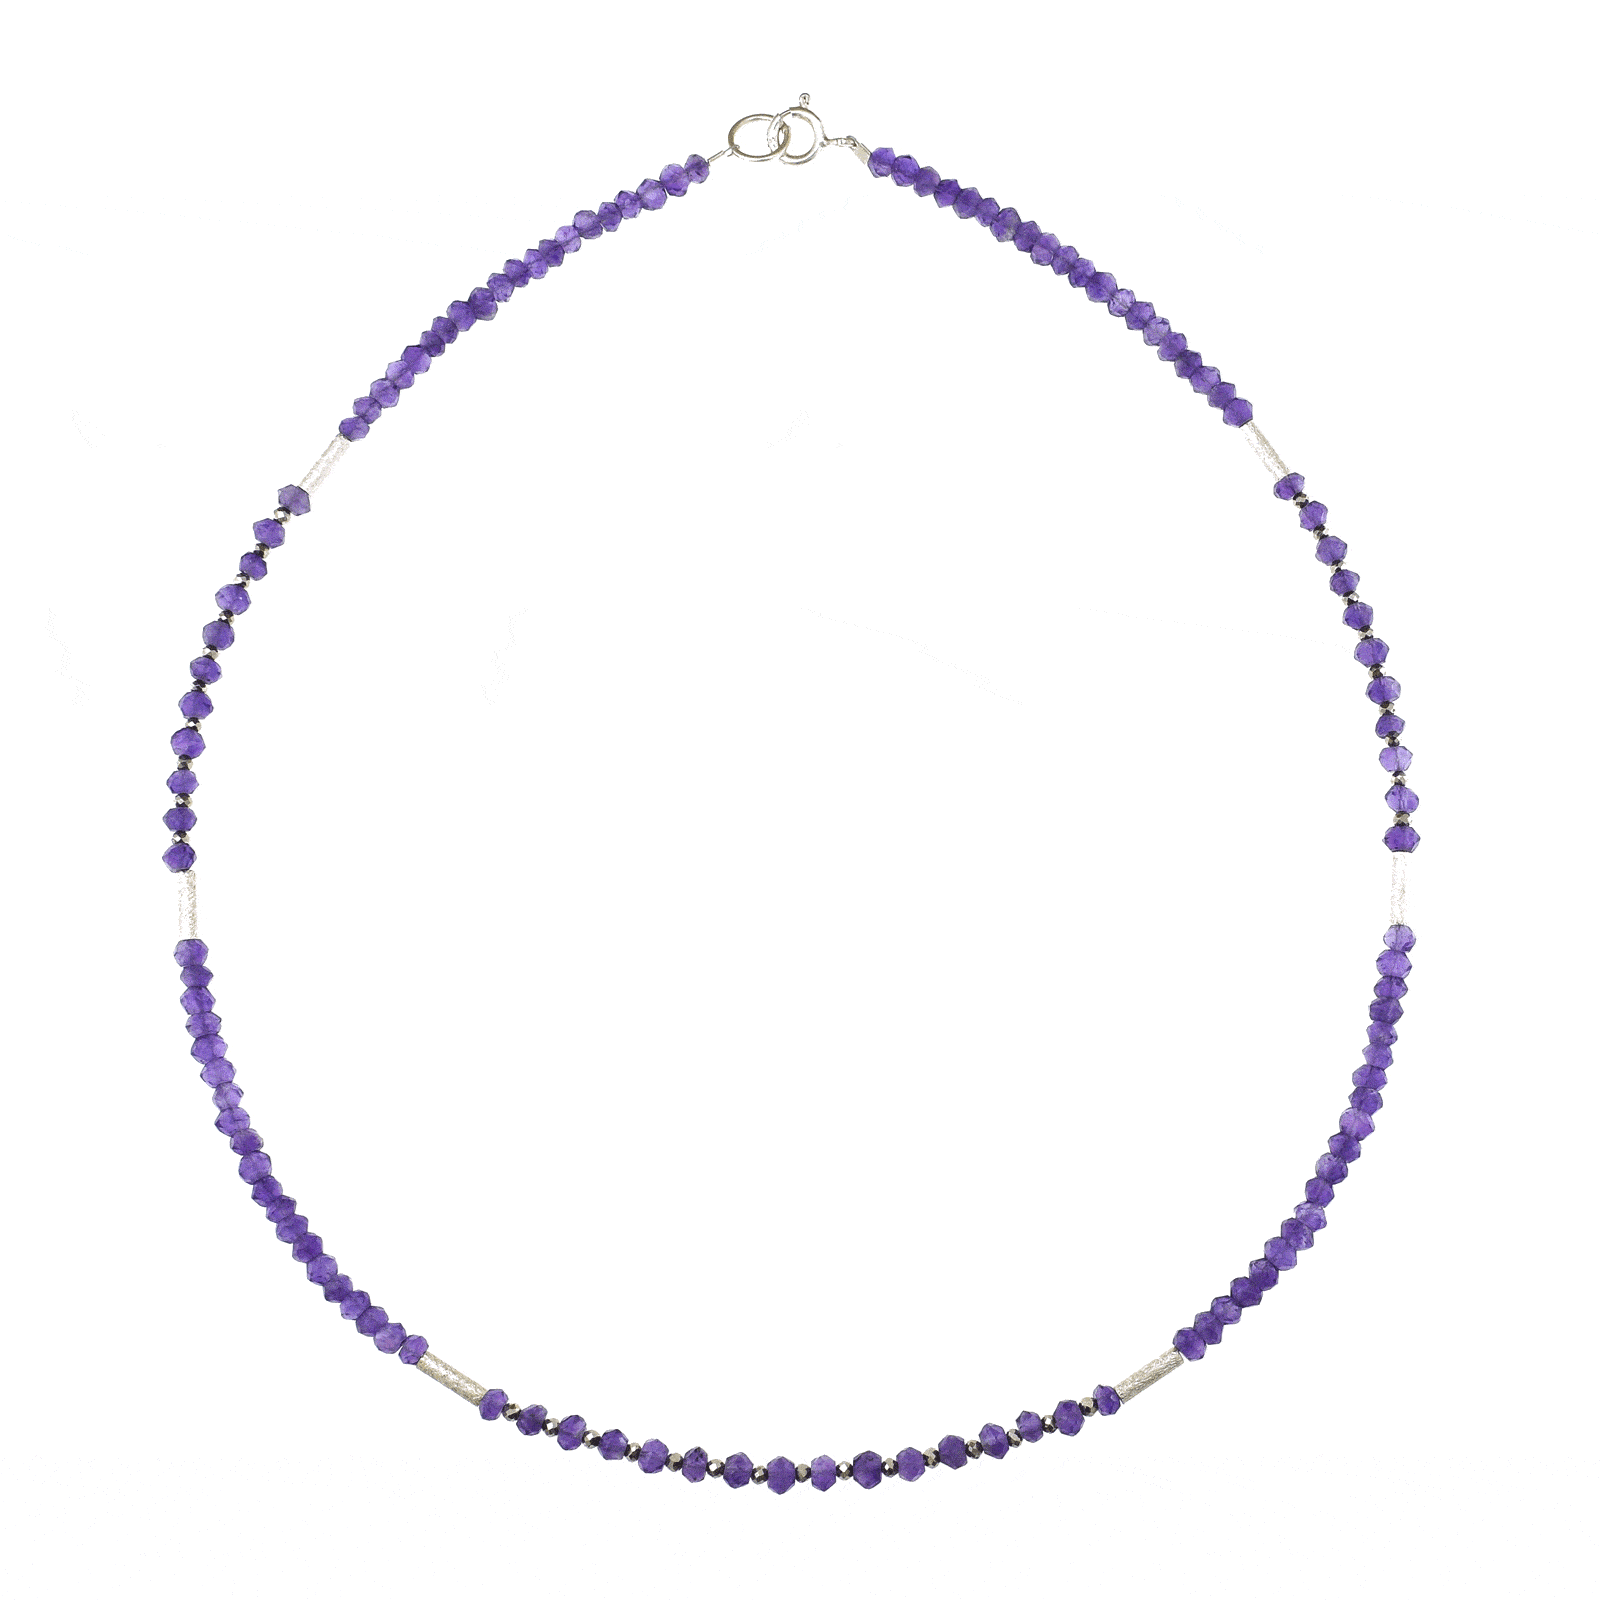 Necklace with Amethyst and Pyrite gemstones